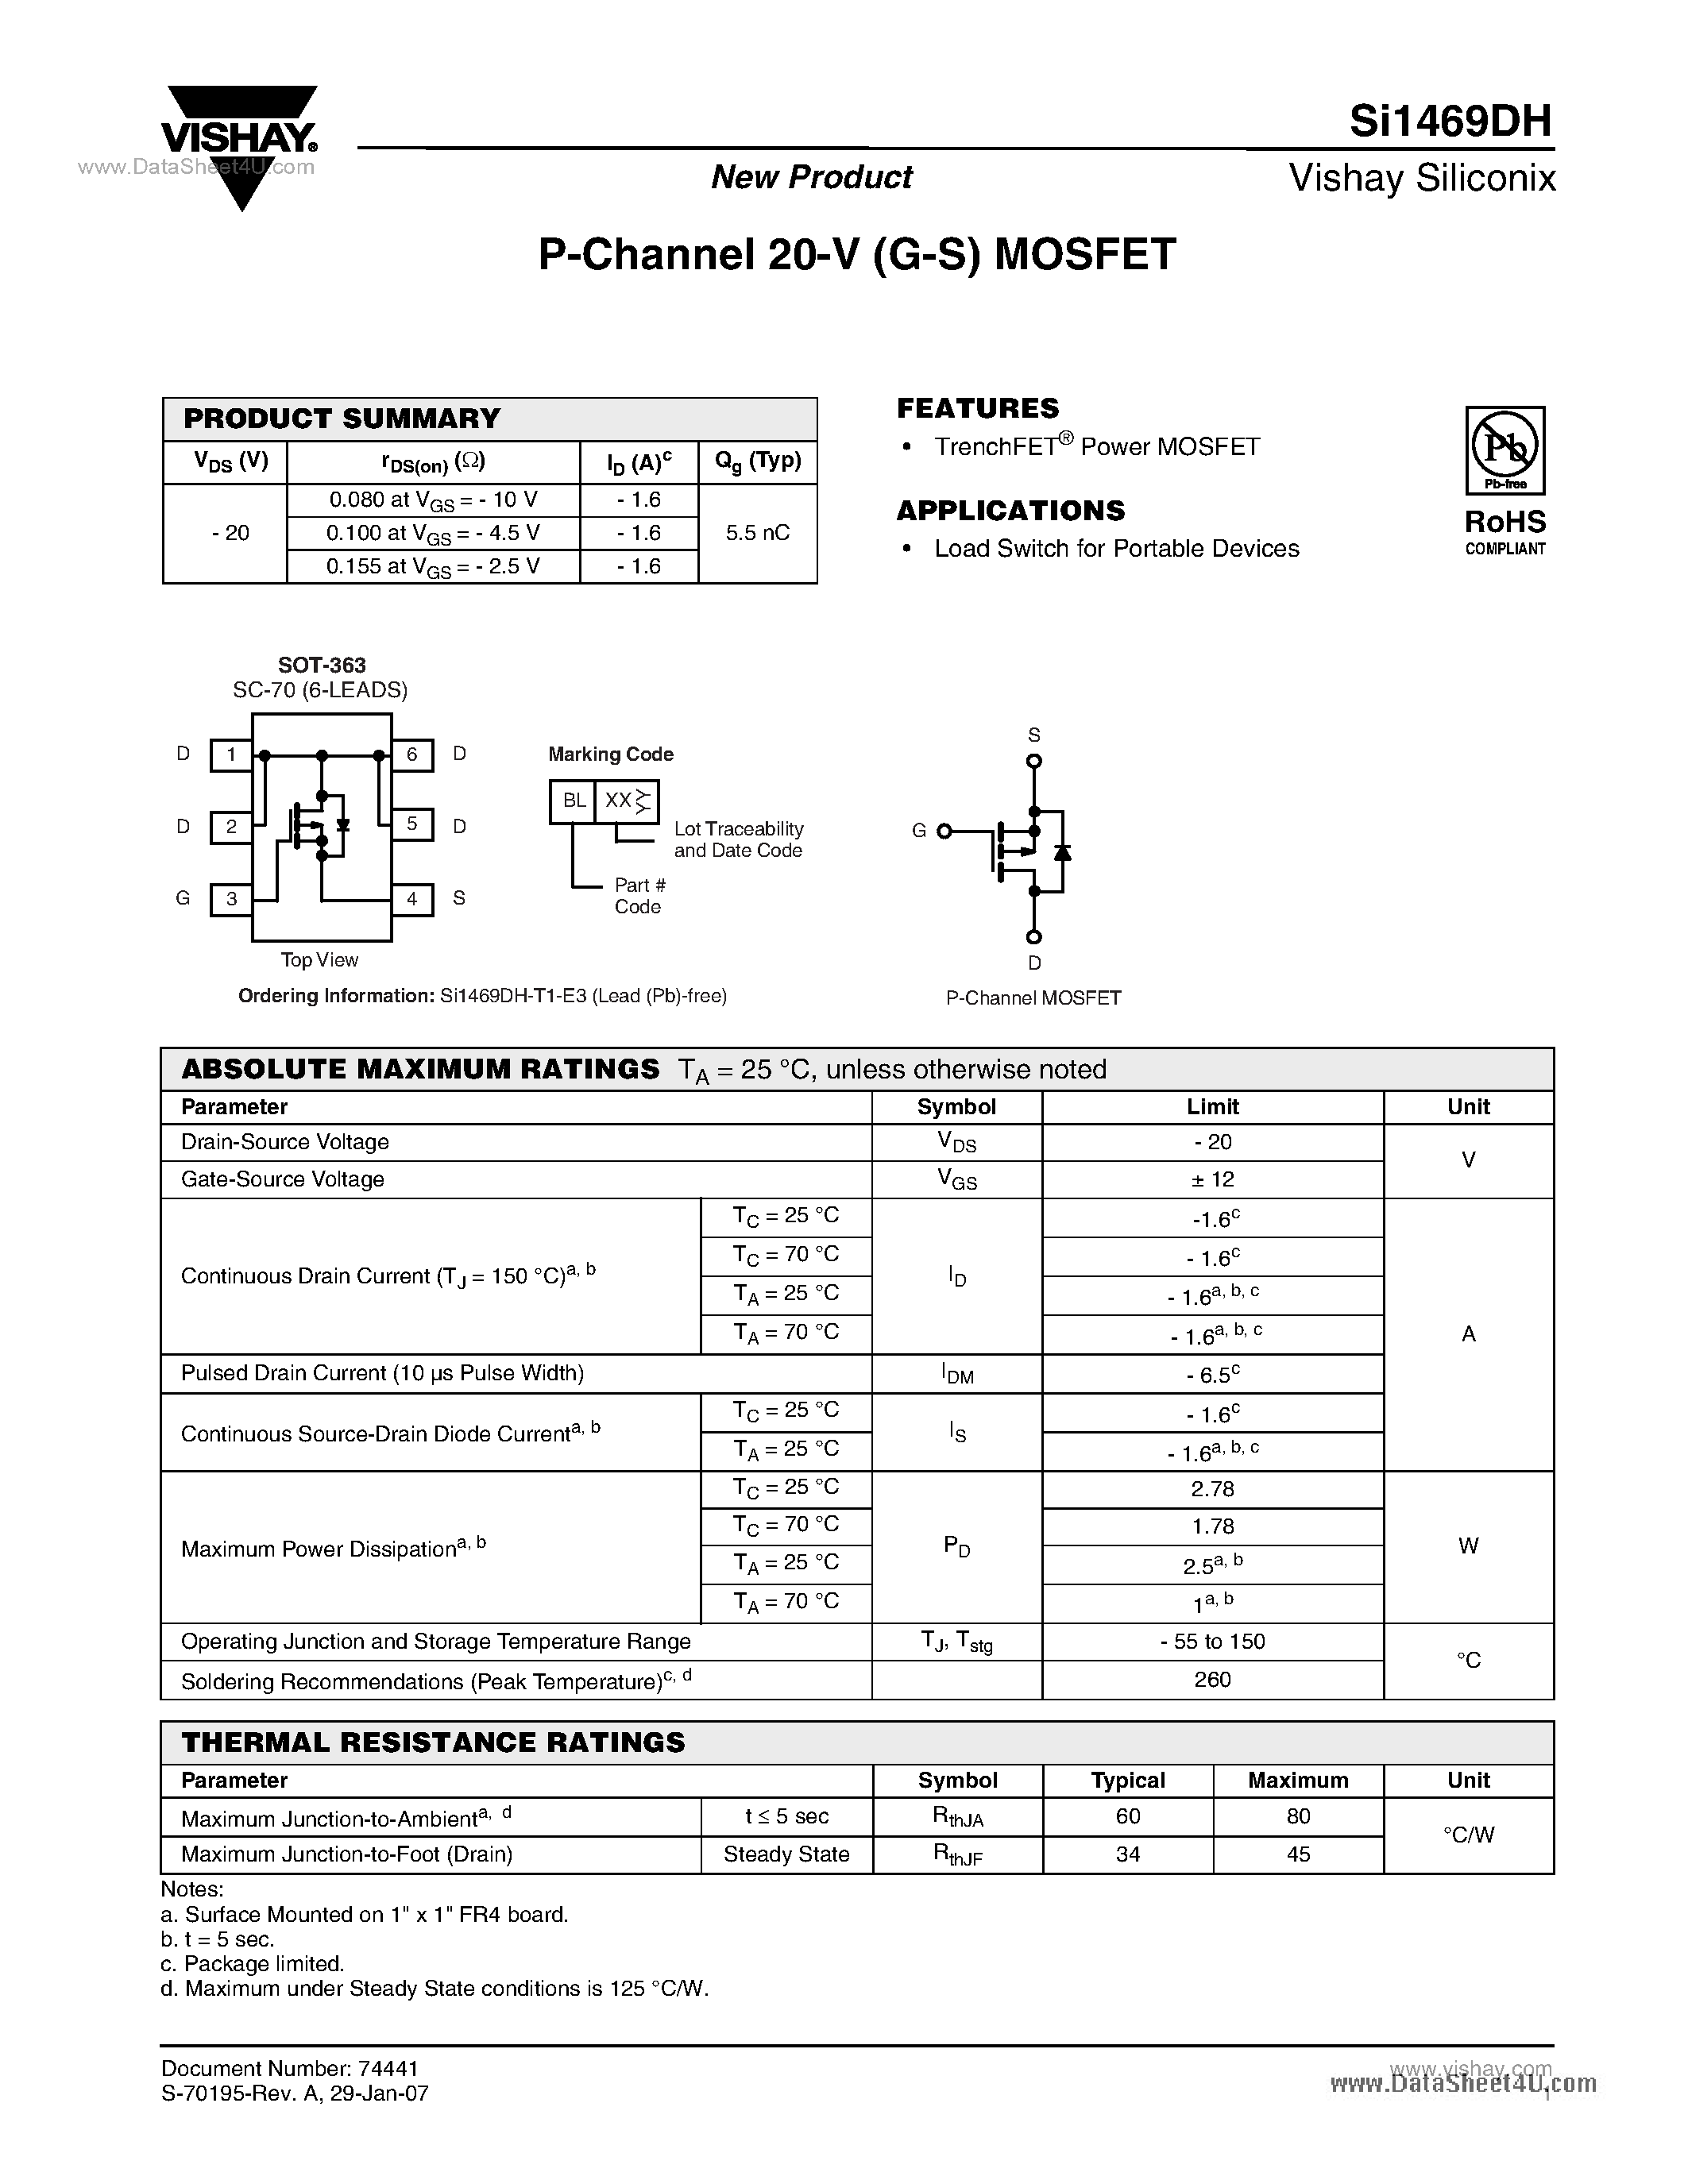 Даташит SI1469DH - P-Channel 20-V (G-S) MOSFET страница 1